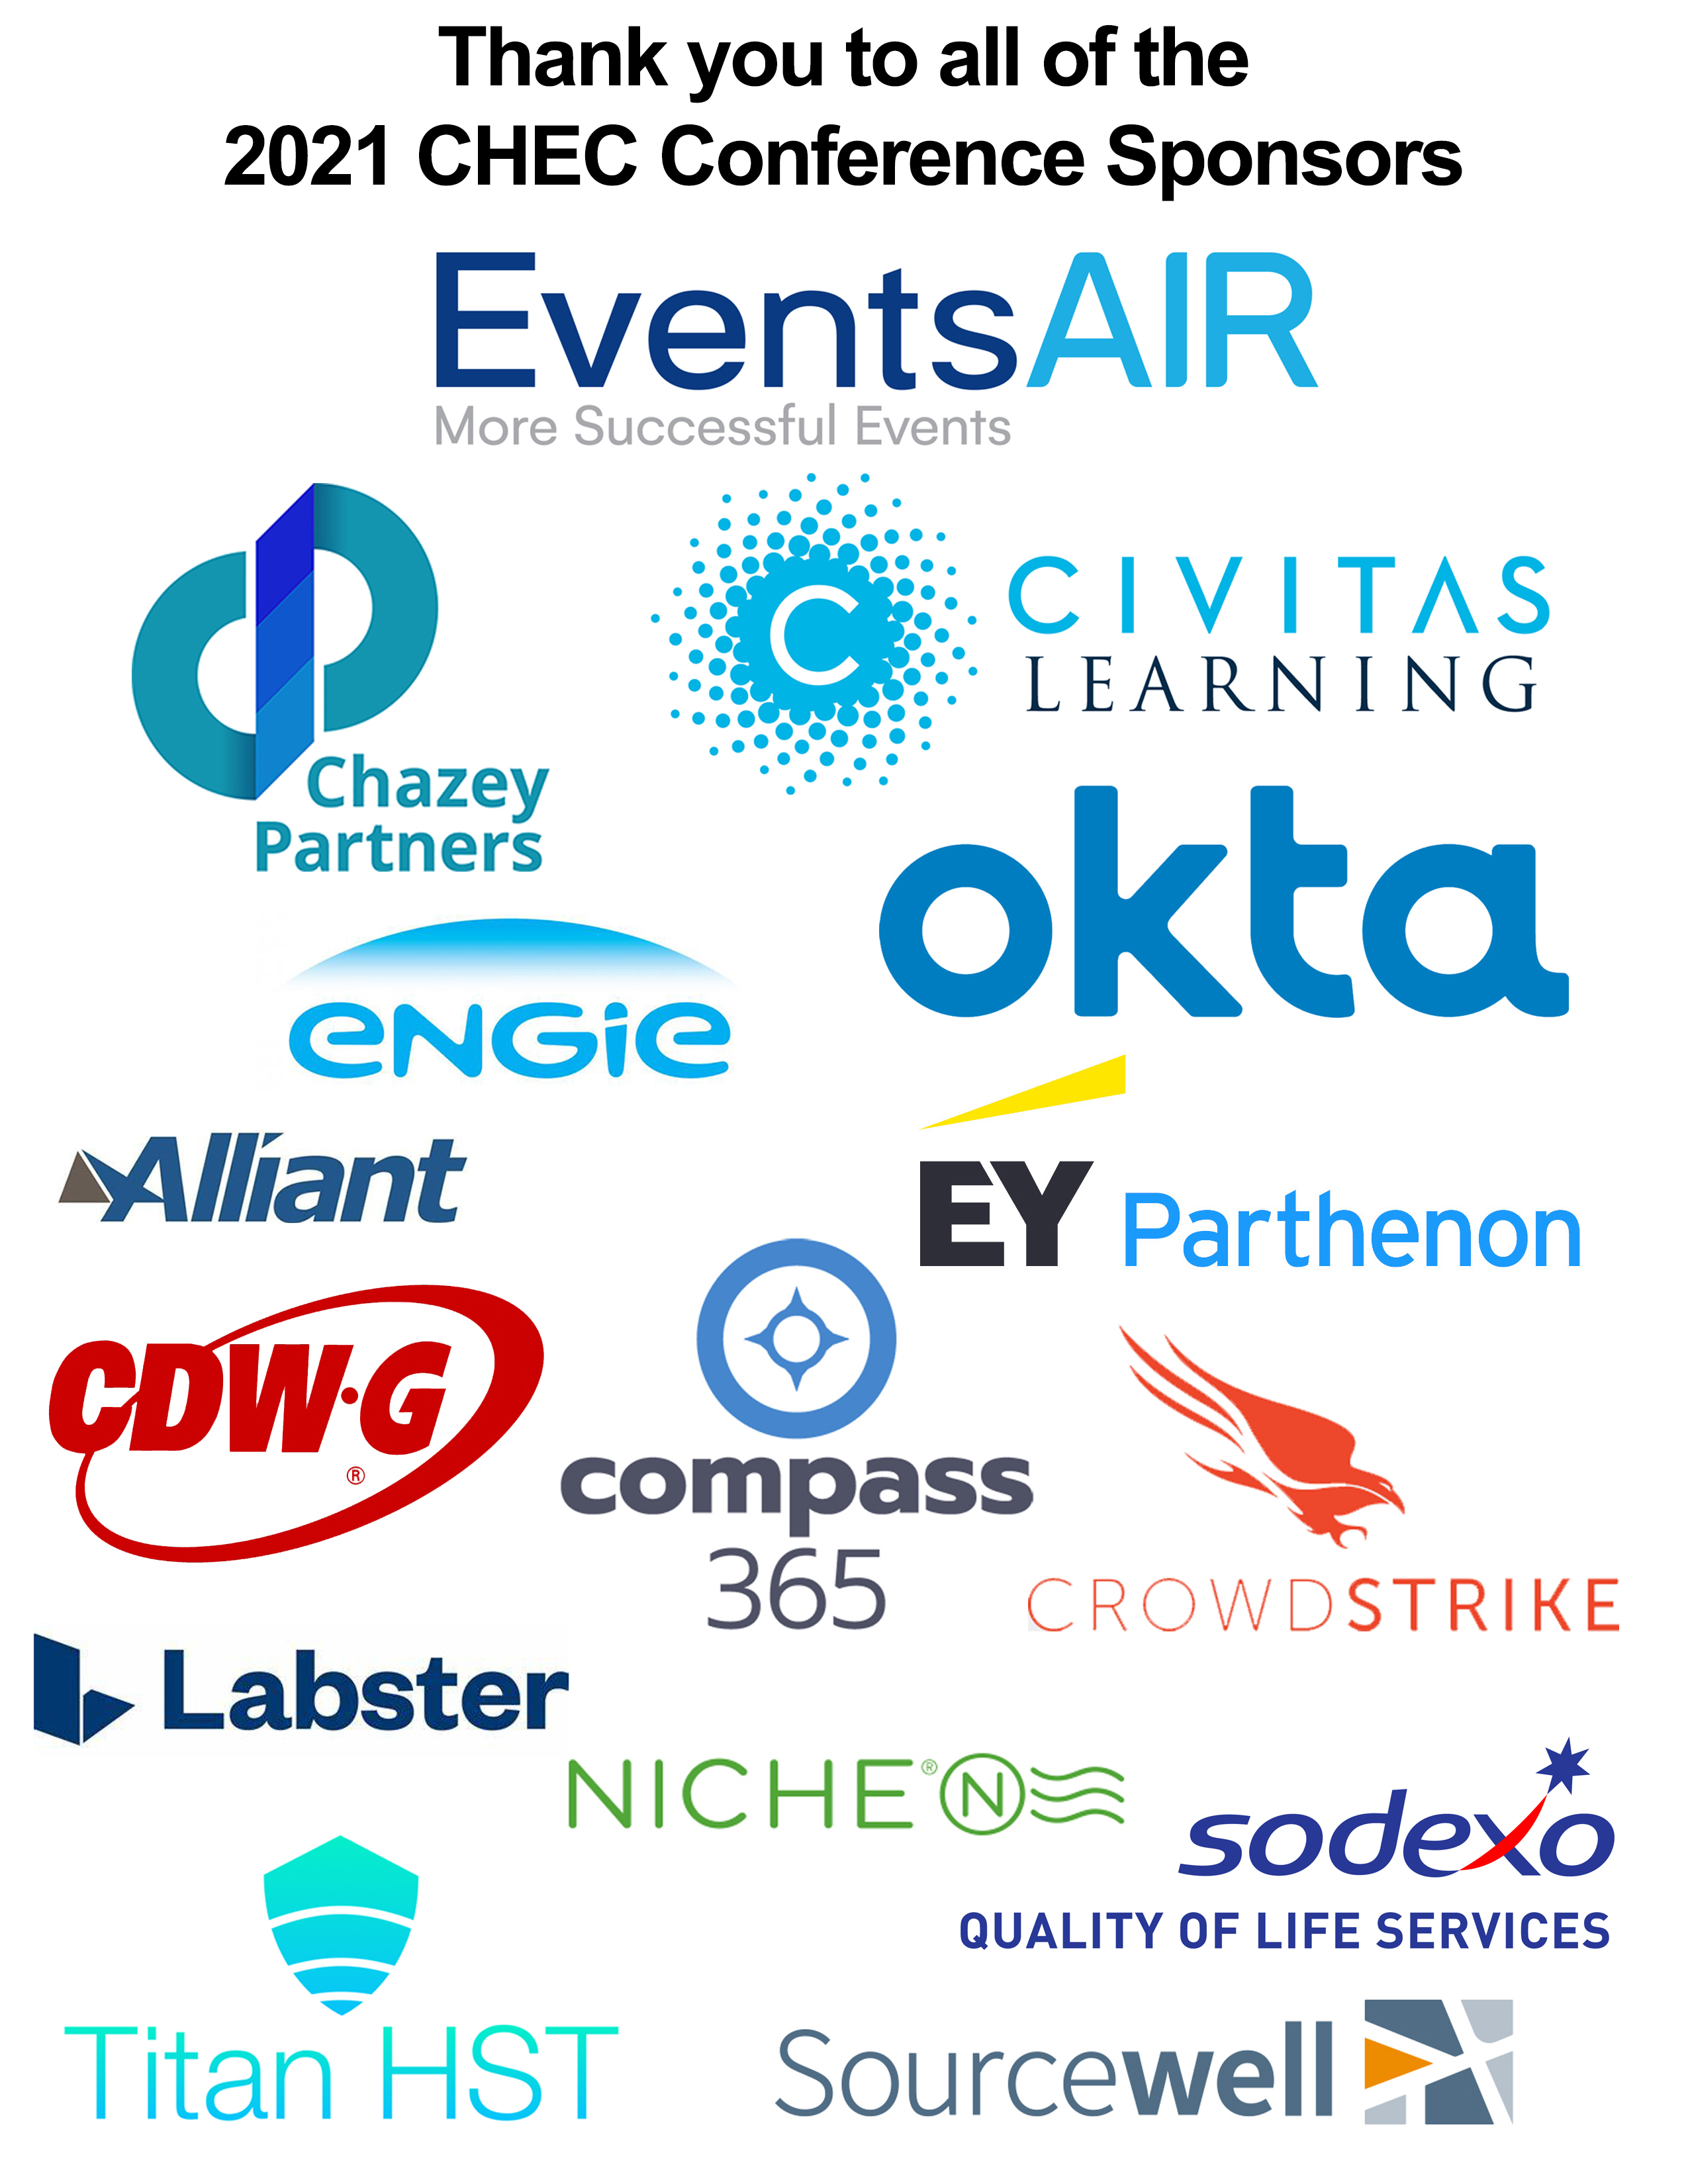 Thank you to all of the 2019 CHEC Conference Sponsors